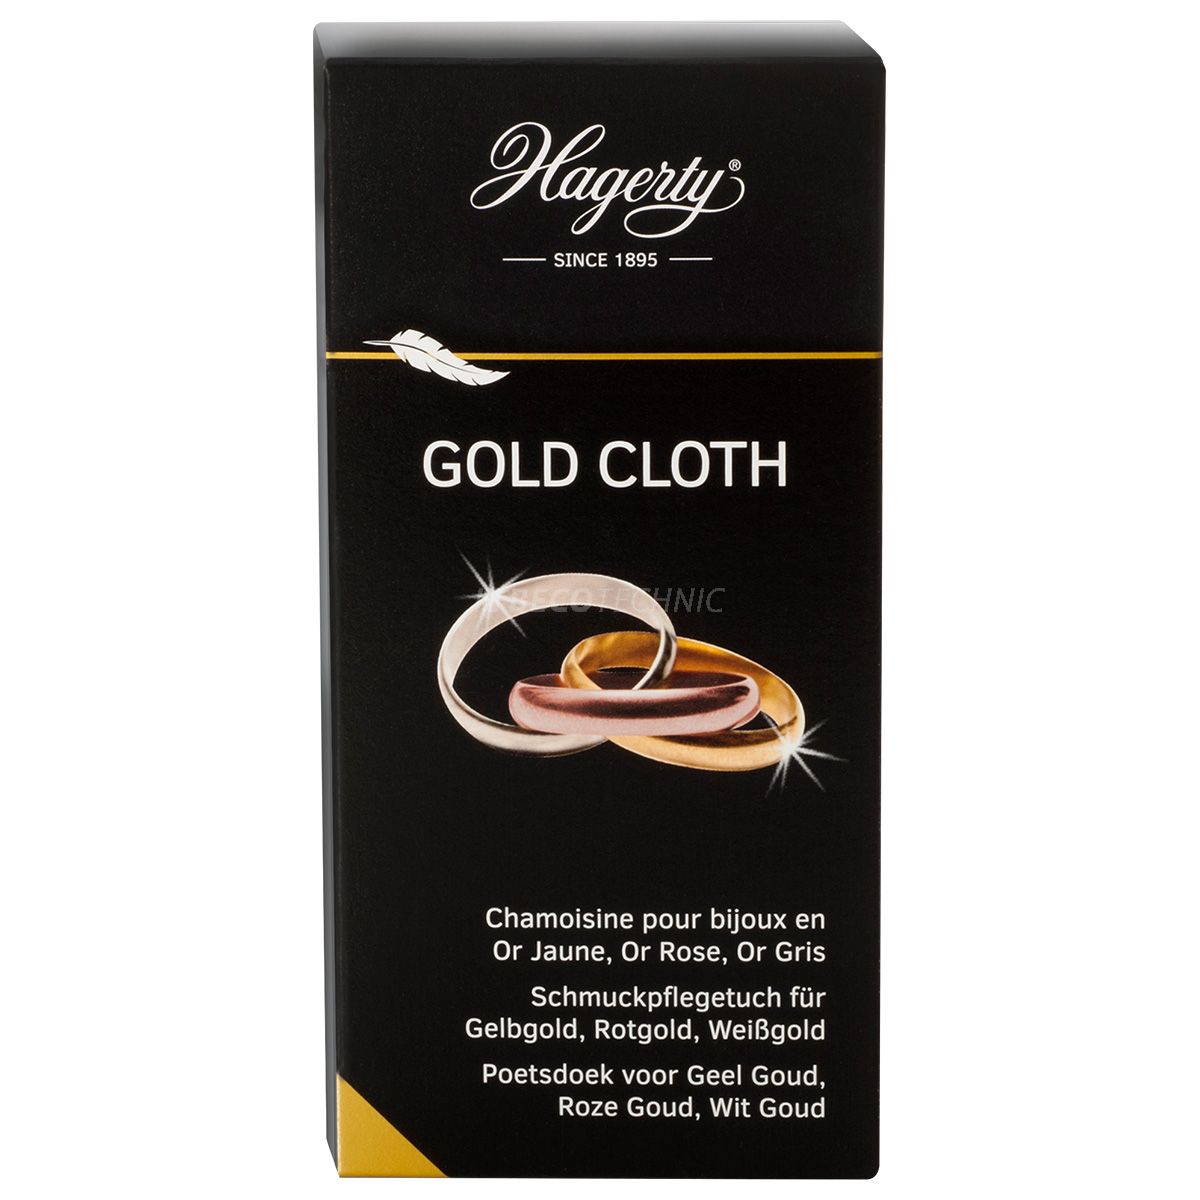 Hagerty Gold Cloth, care cloth for gold, 36 x 30 cm